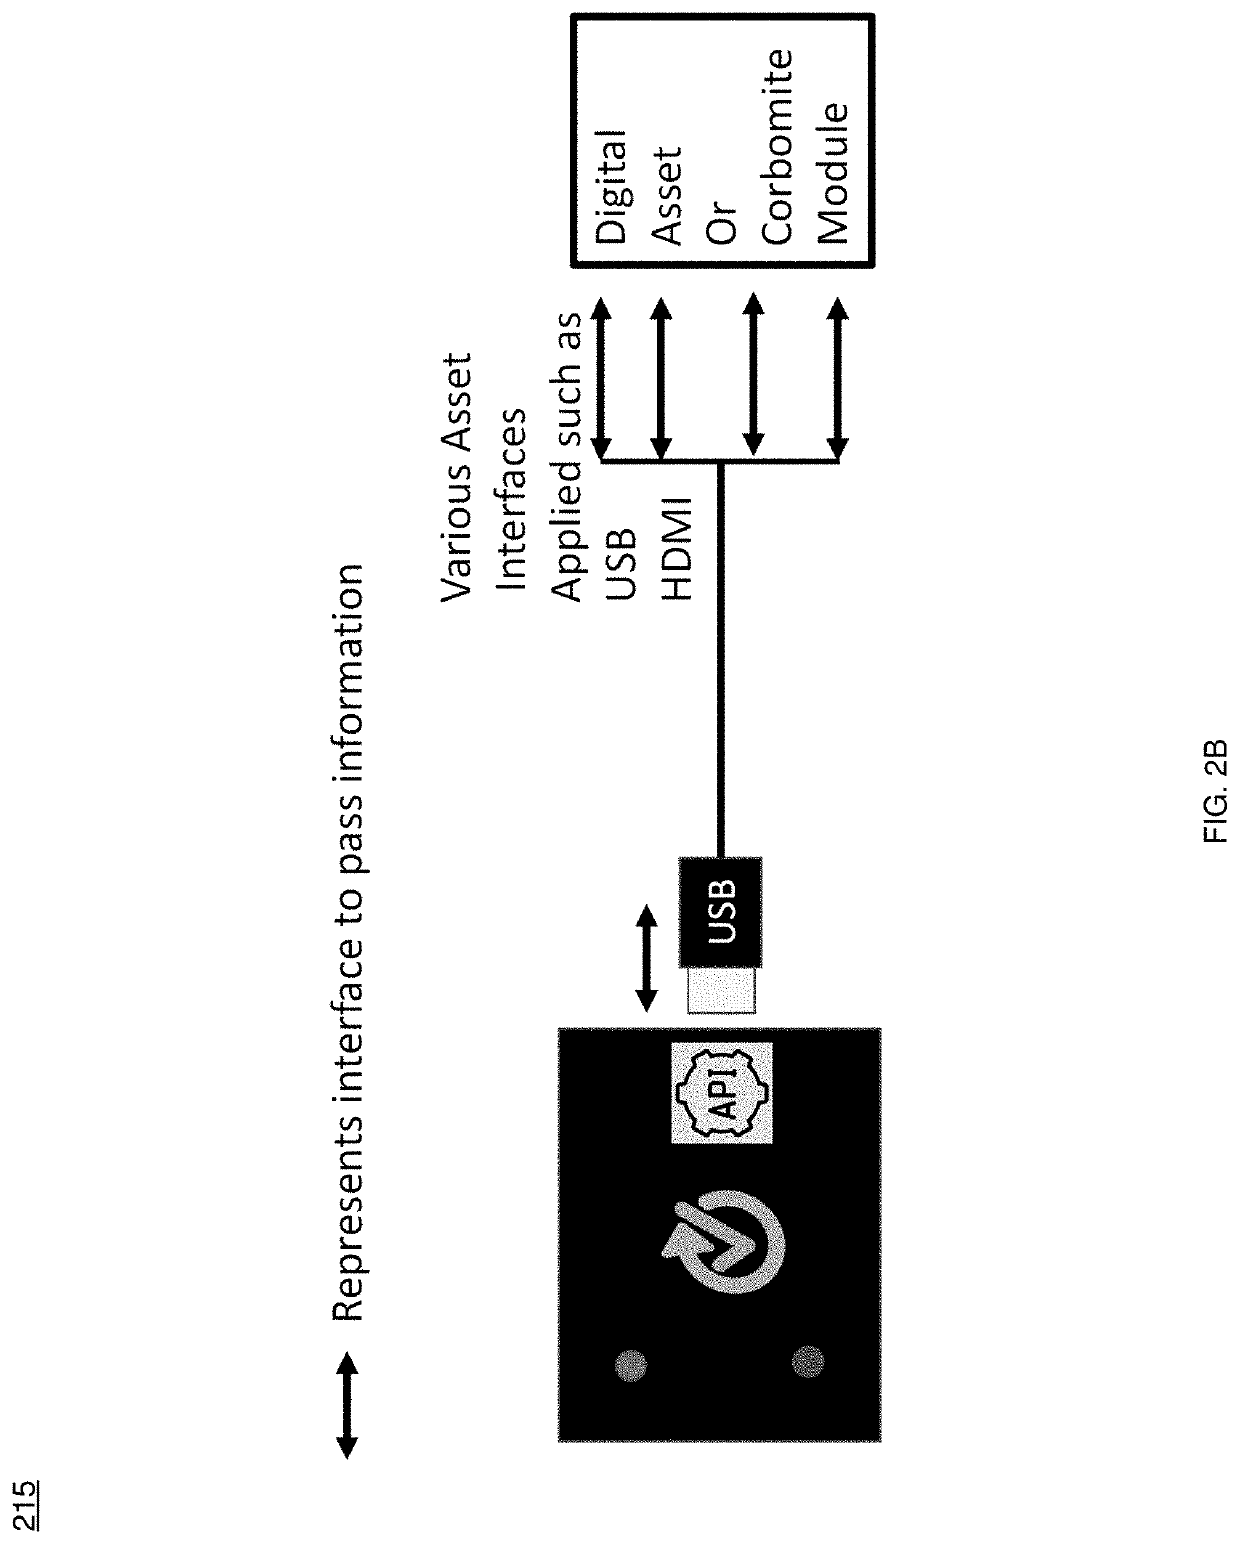 System and method for non-network dependent cybersecurity